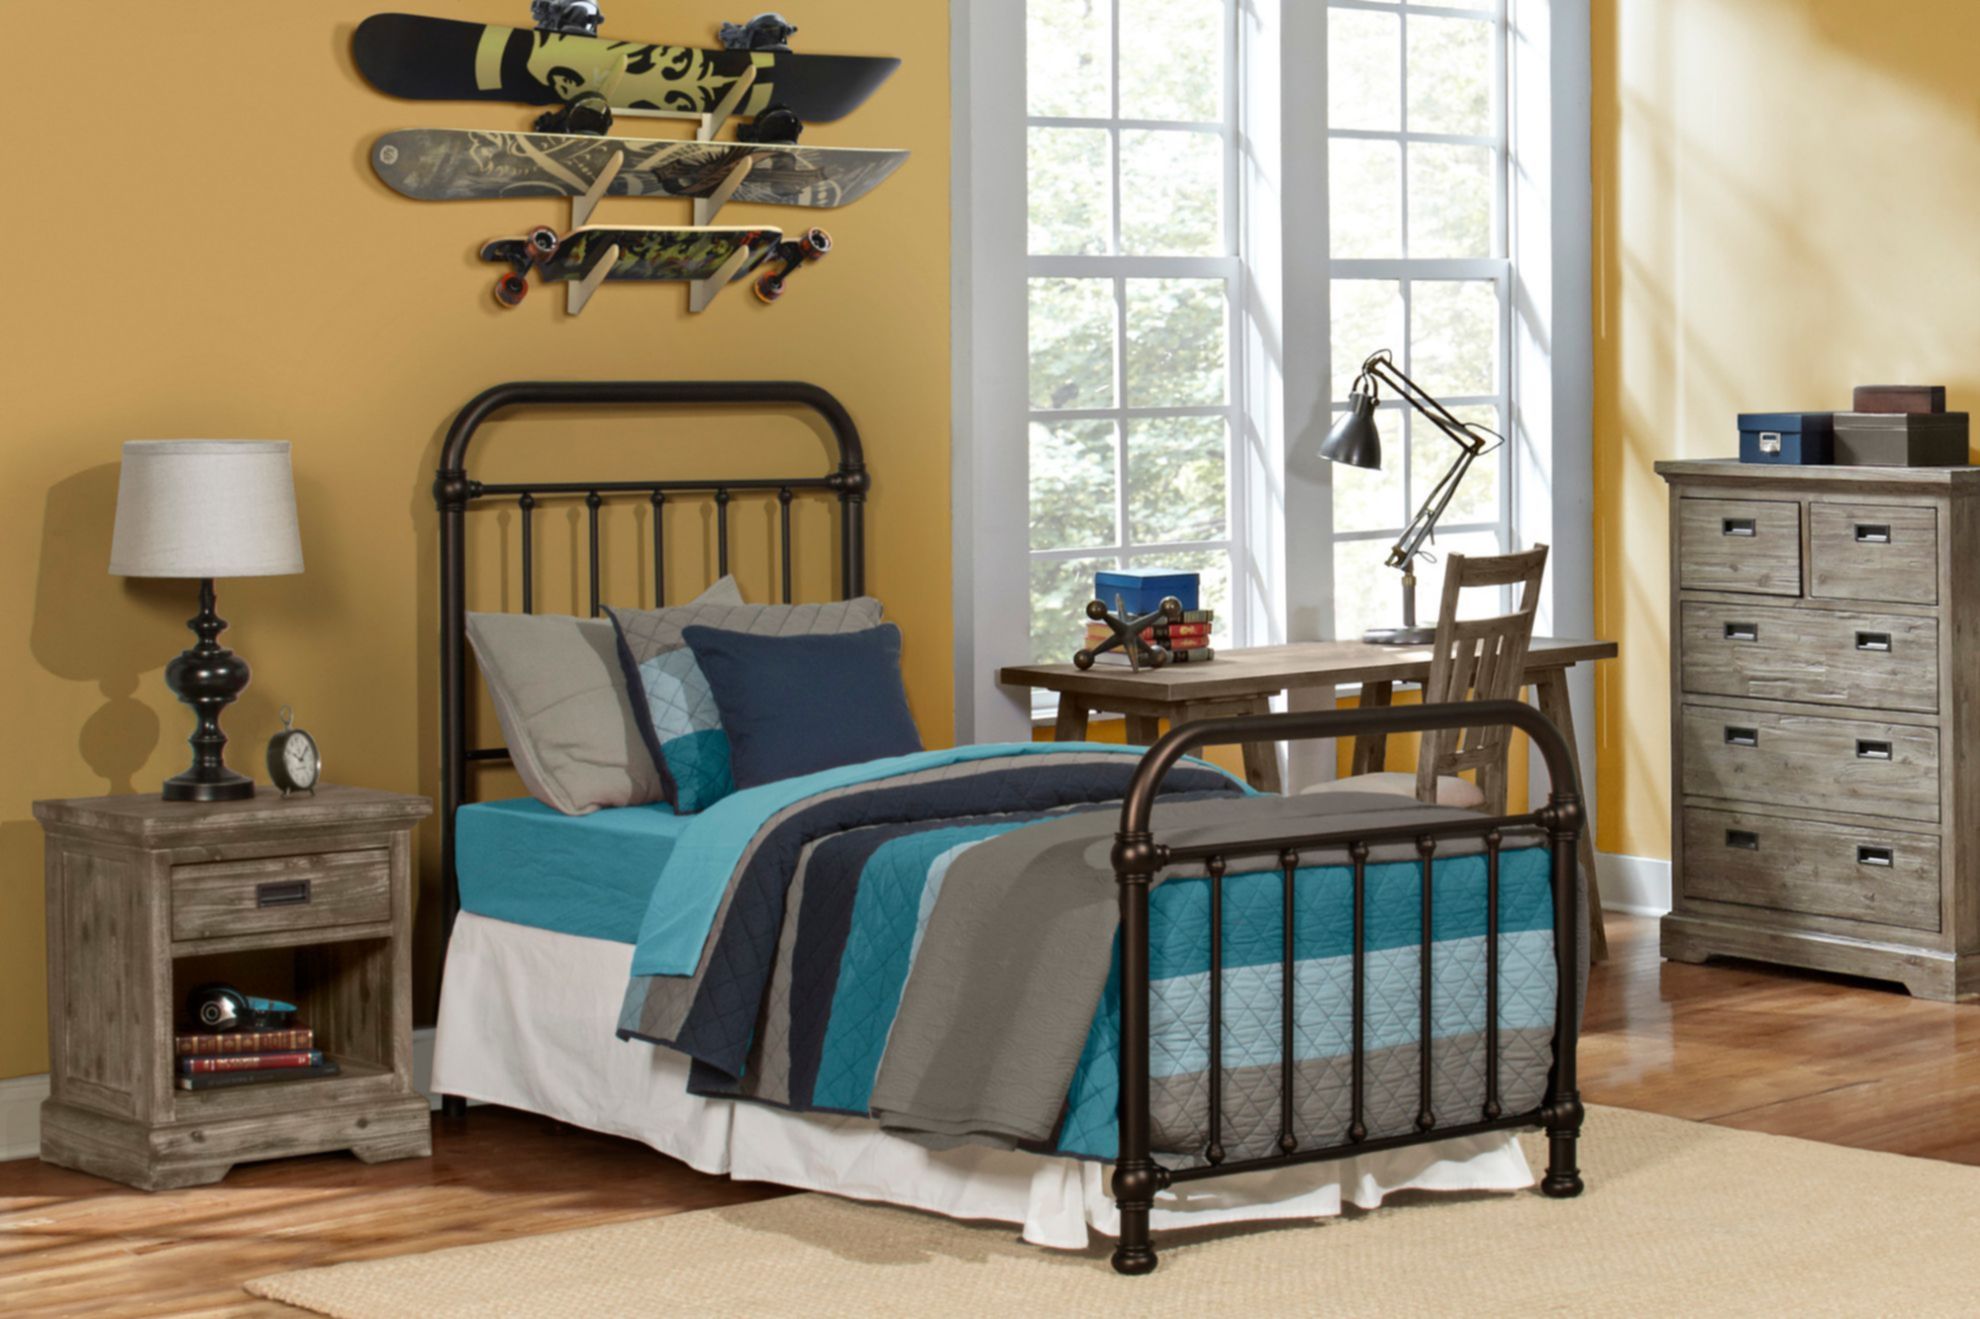 Picture of Kirkland Twin Headboard and Frame Set